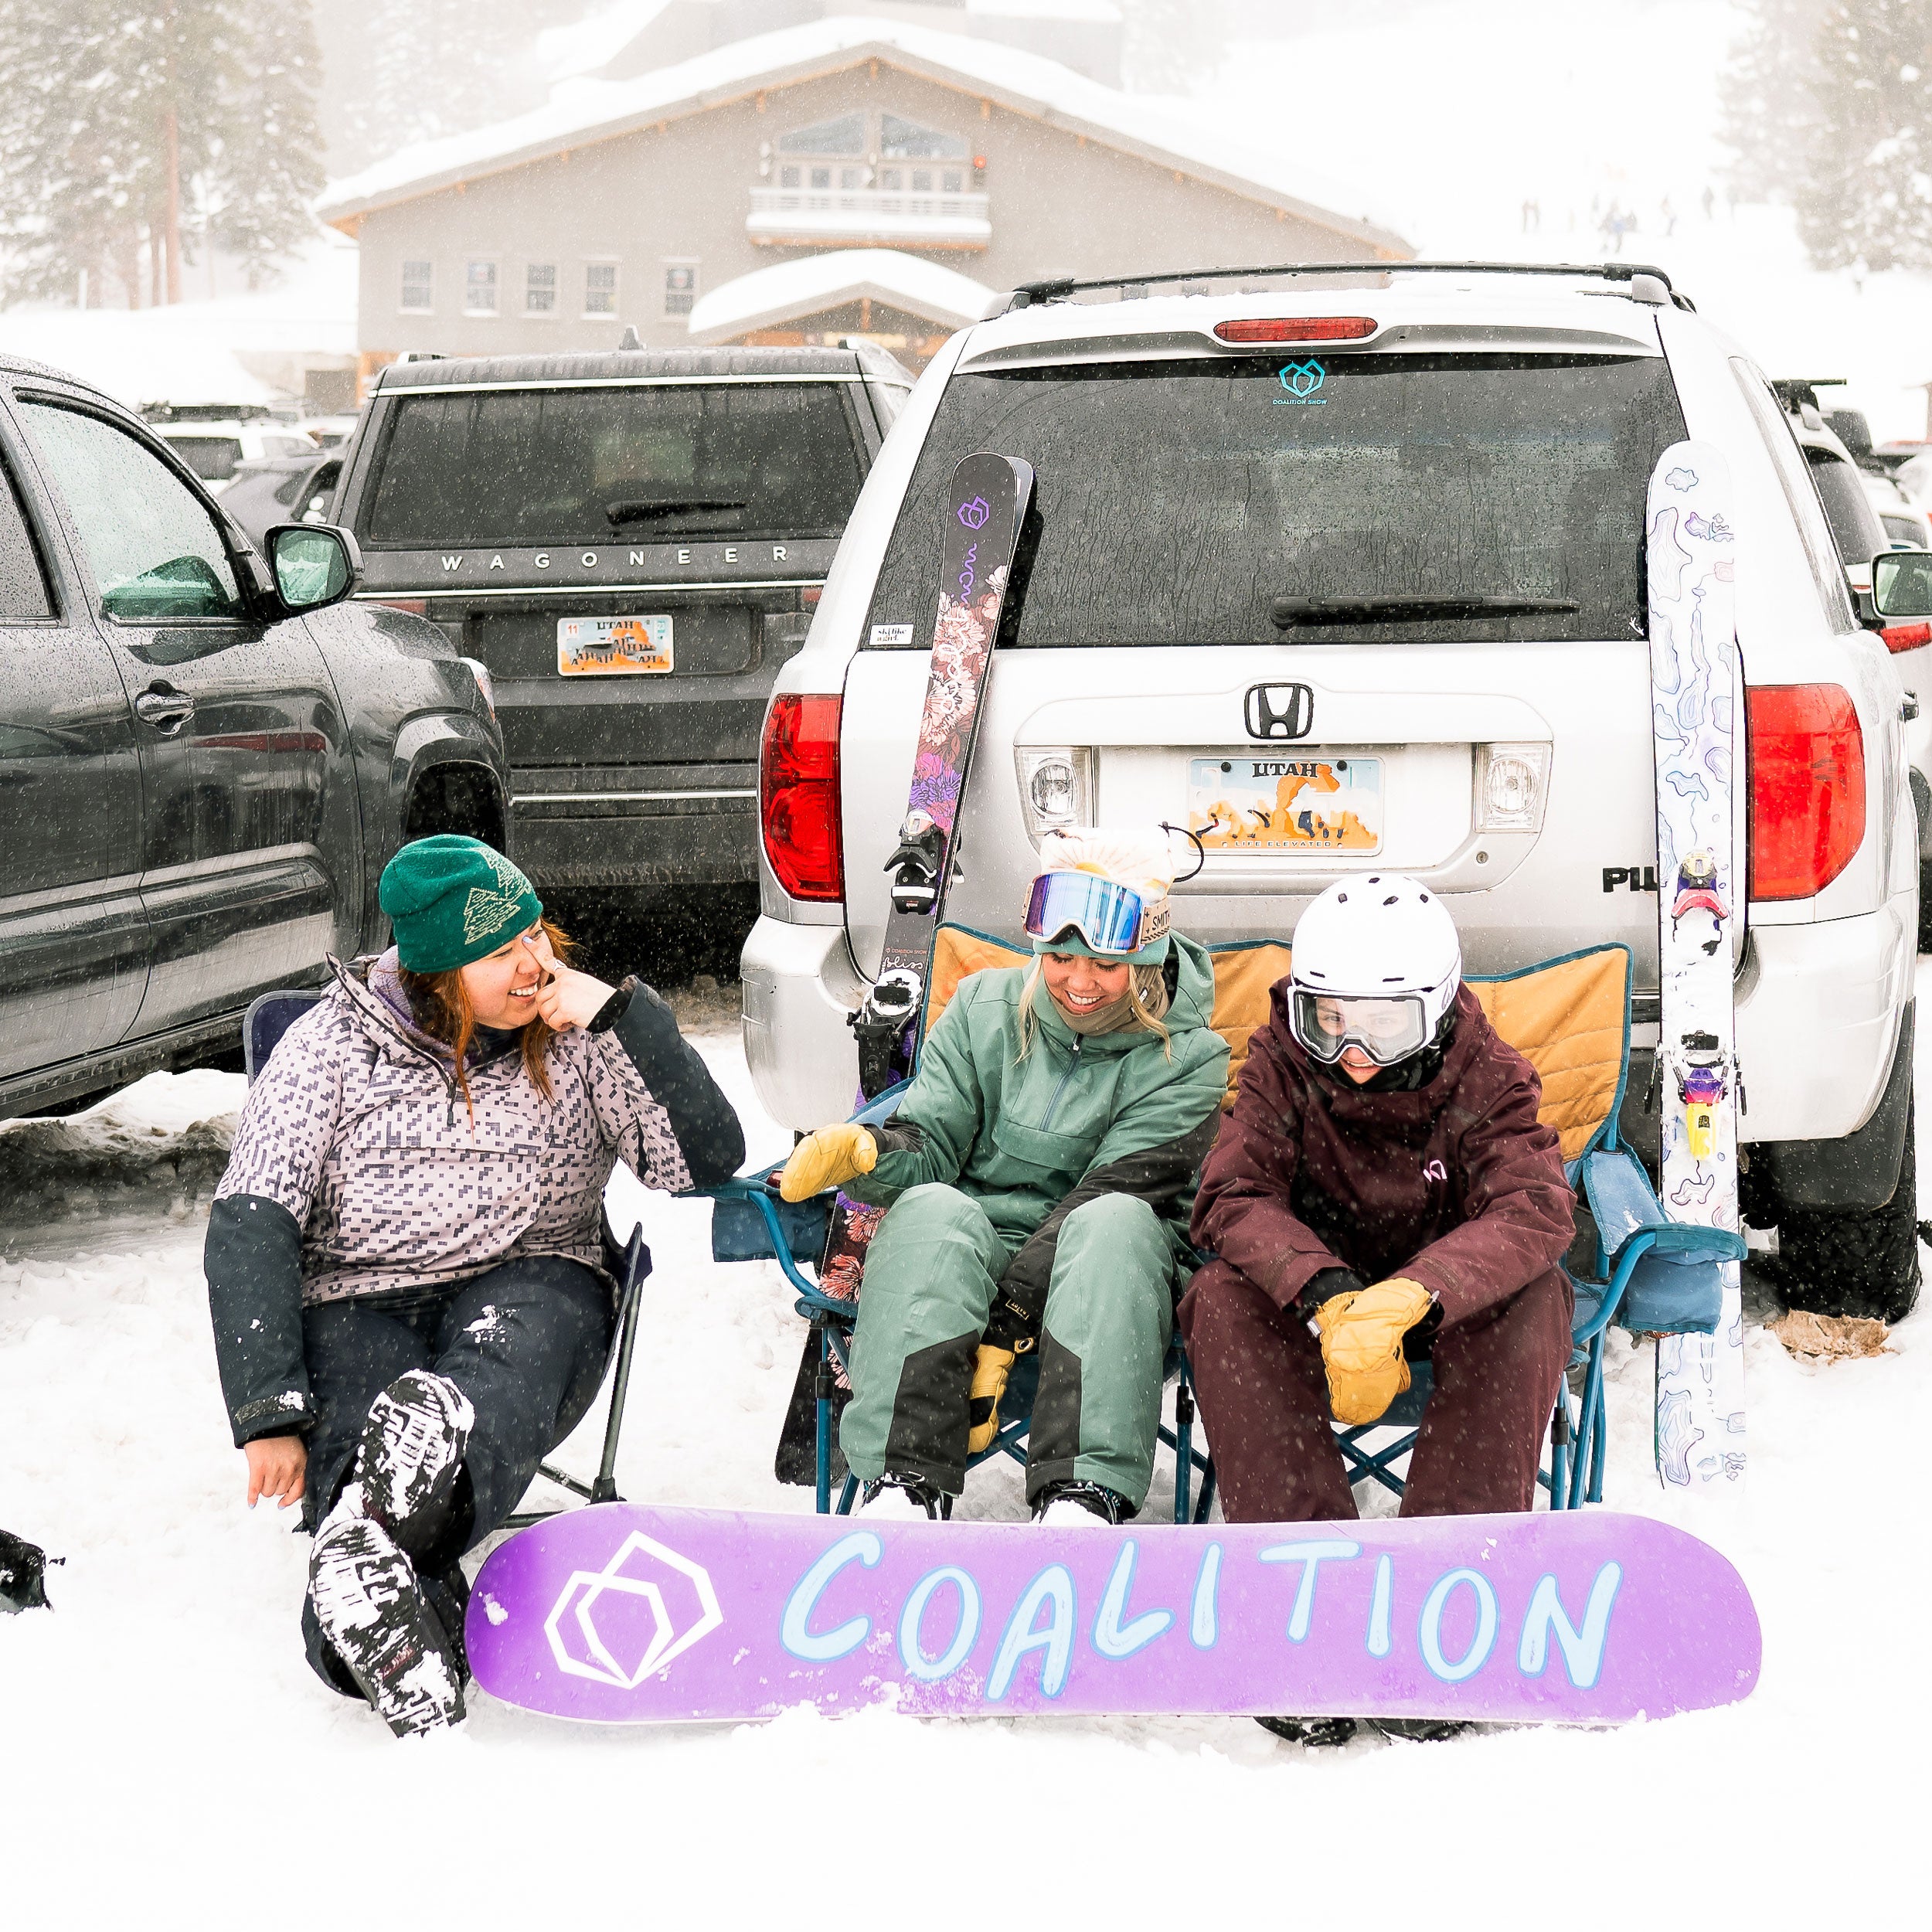 The Ultimate Guide to Spring Skiing (and Beyond) Tailgating